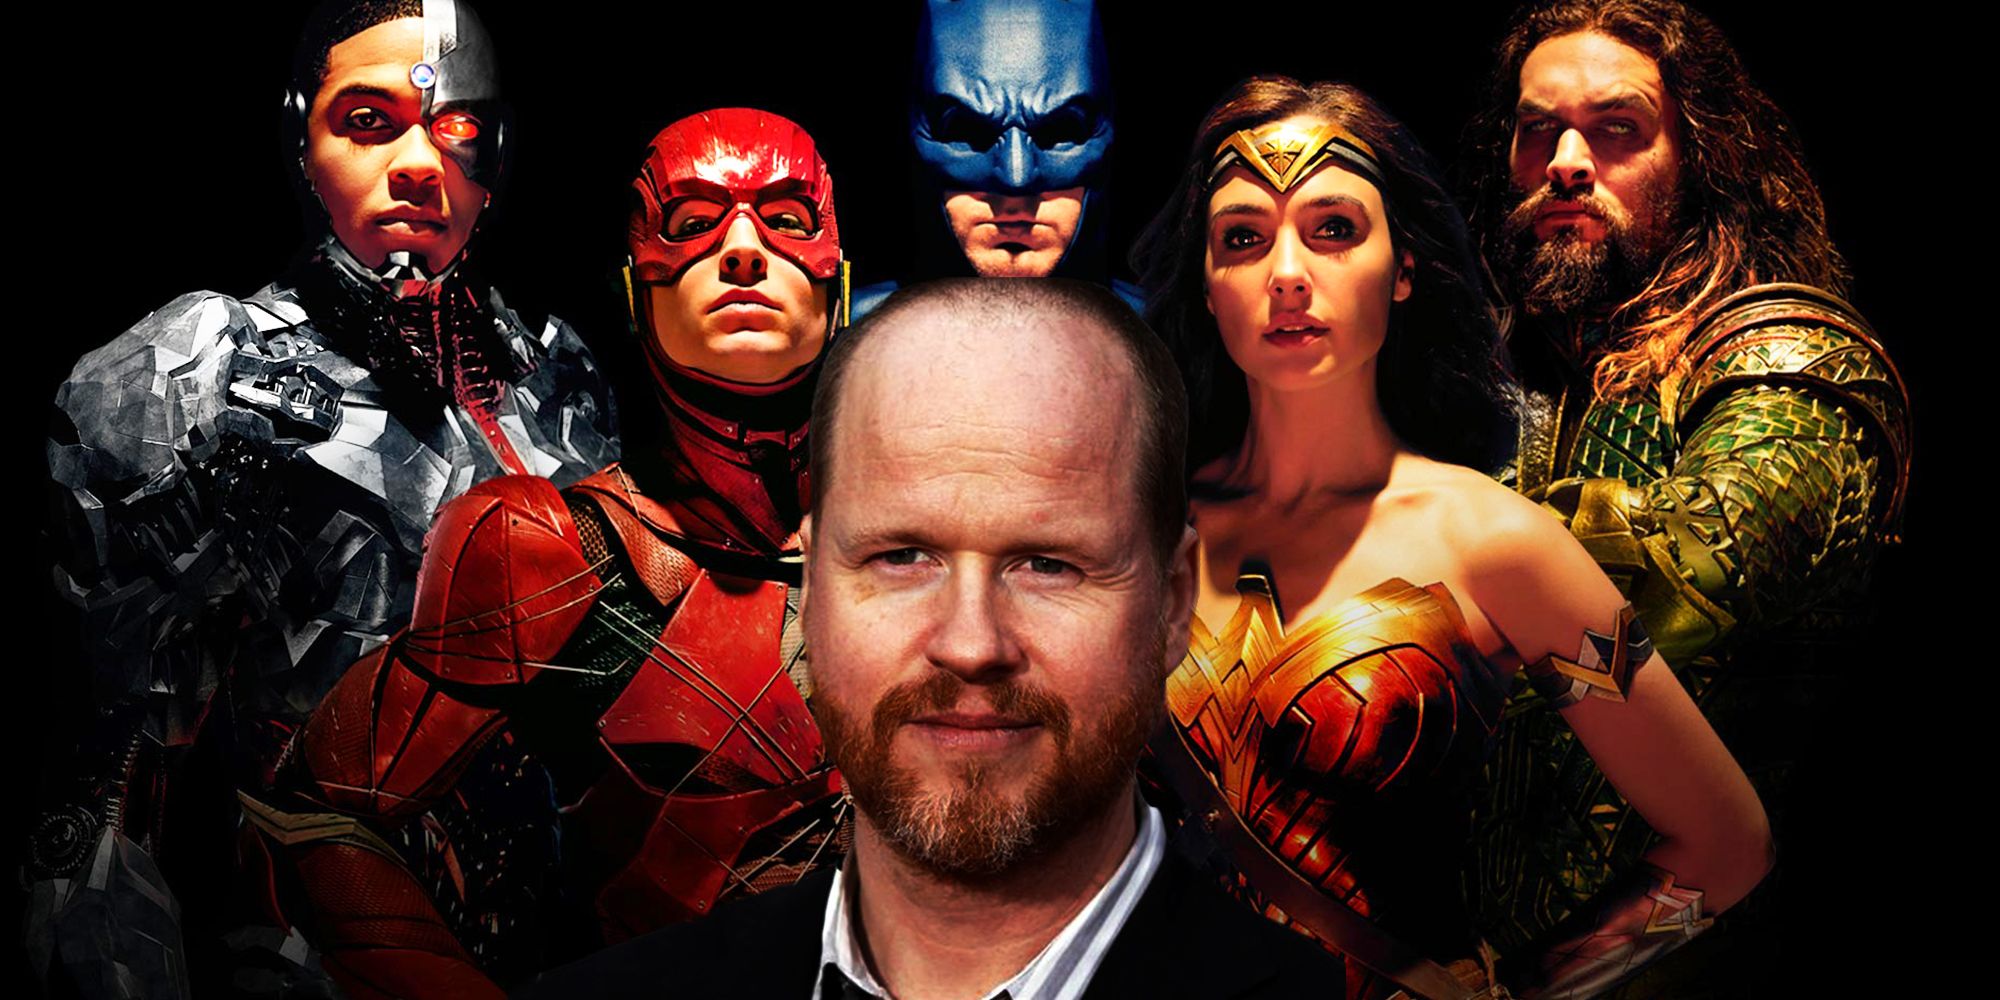 bad movies and shows  - The Whedon version of Justice League.